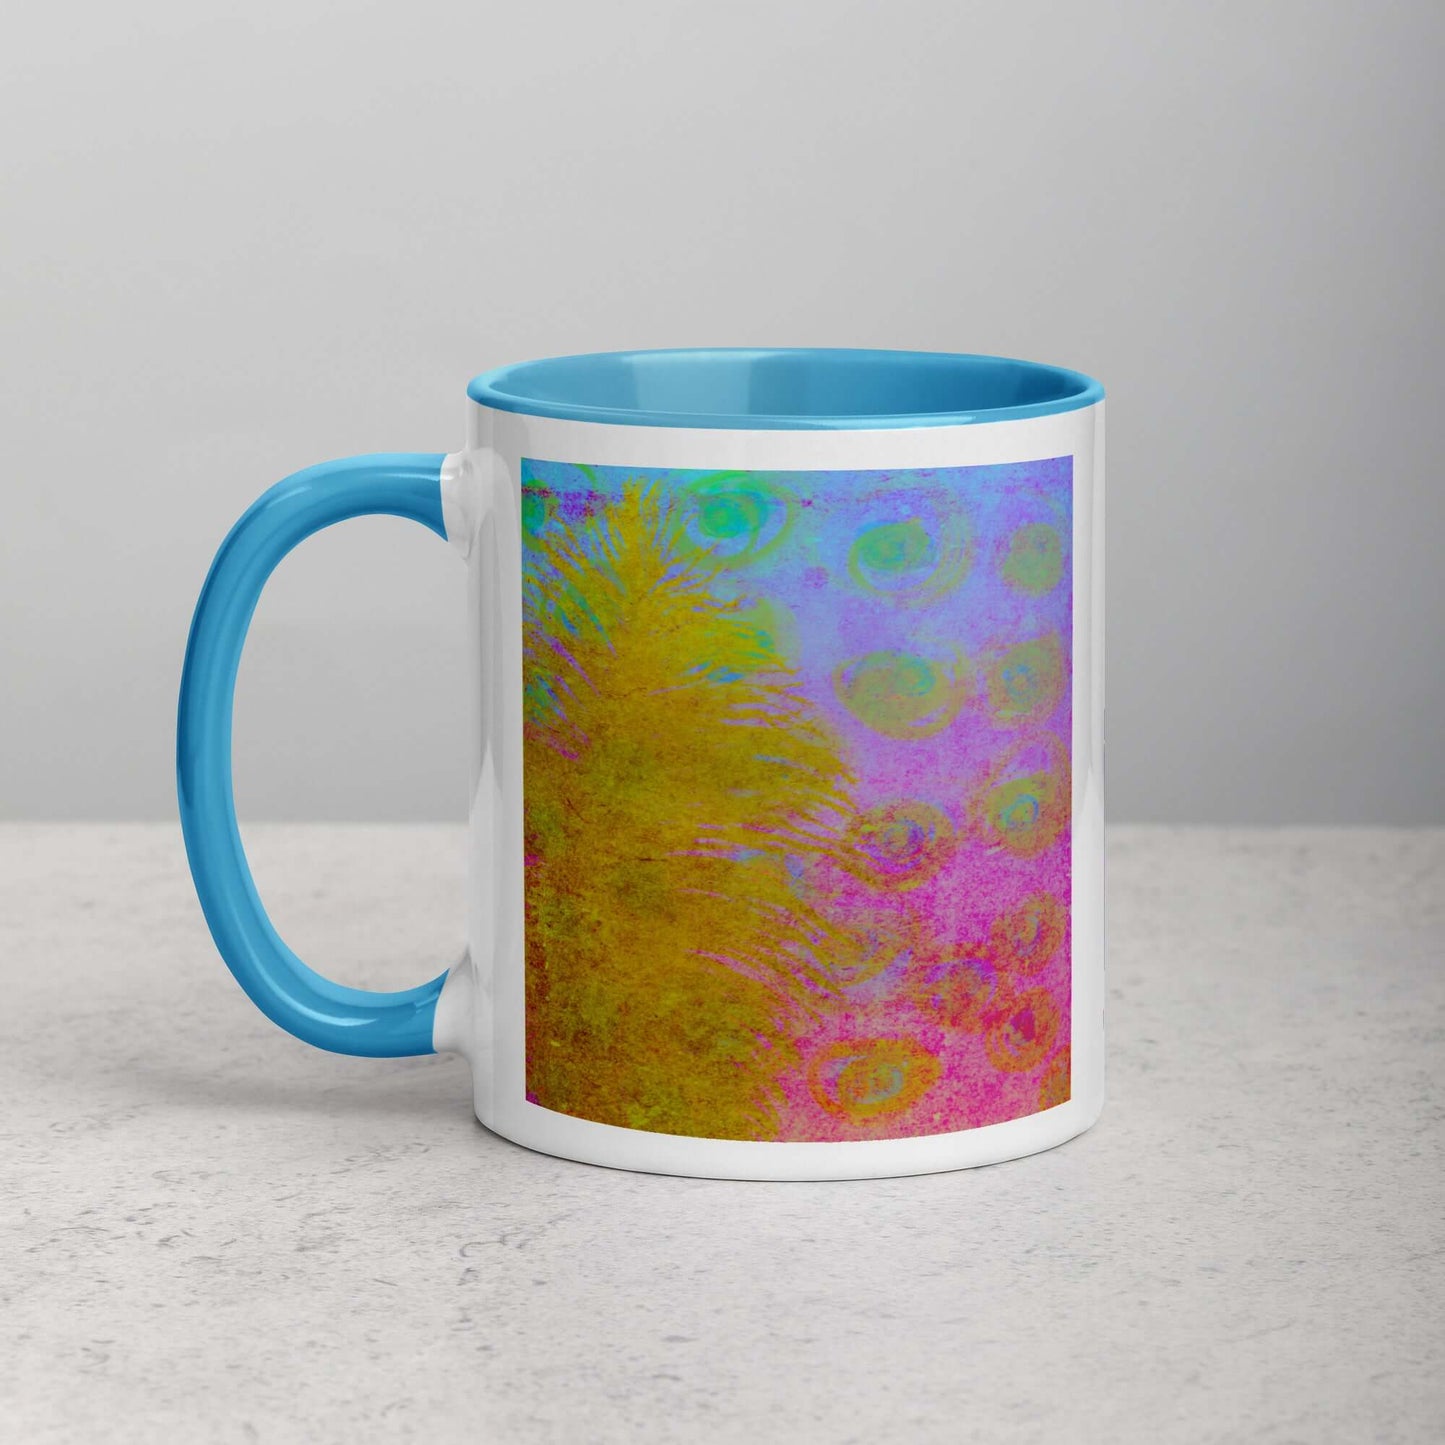 Golden Feather Pink and Blue “Fantasia” Abstract Art Mug with Light Blue Color Inside Left Handed Front View